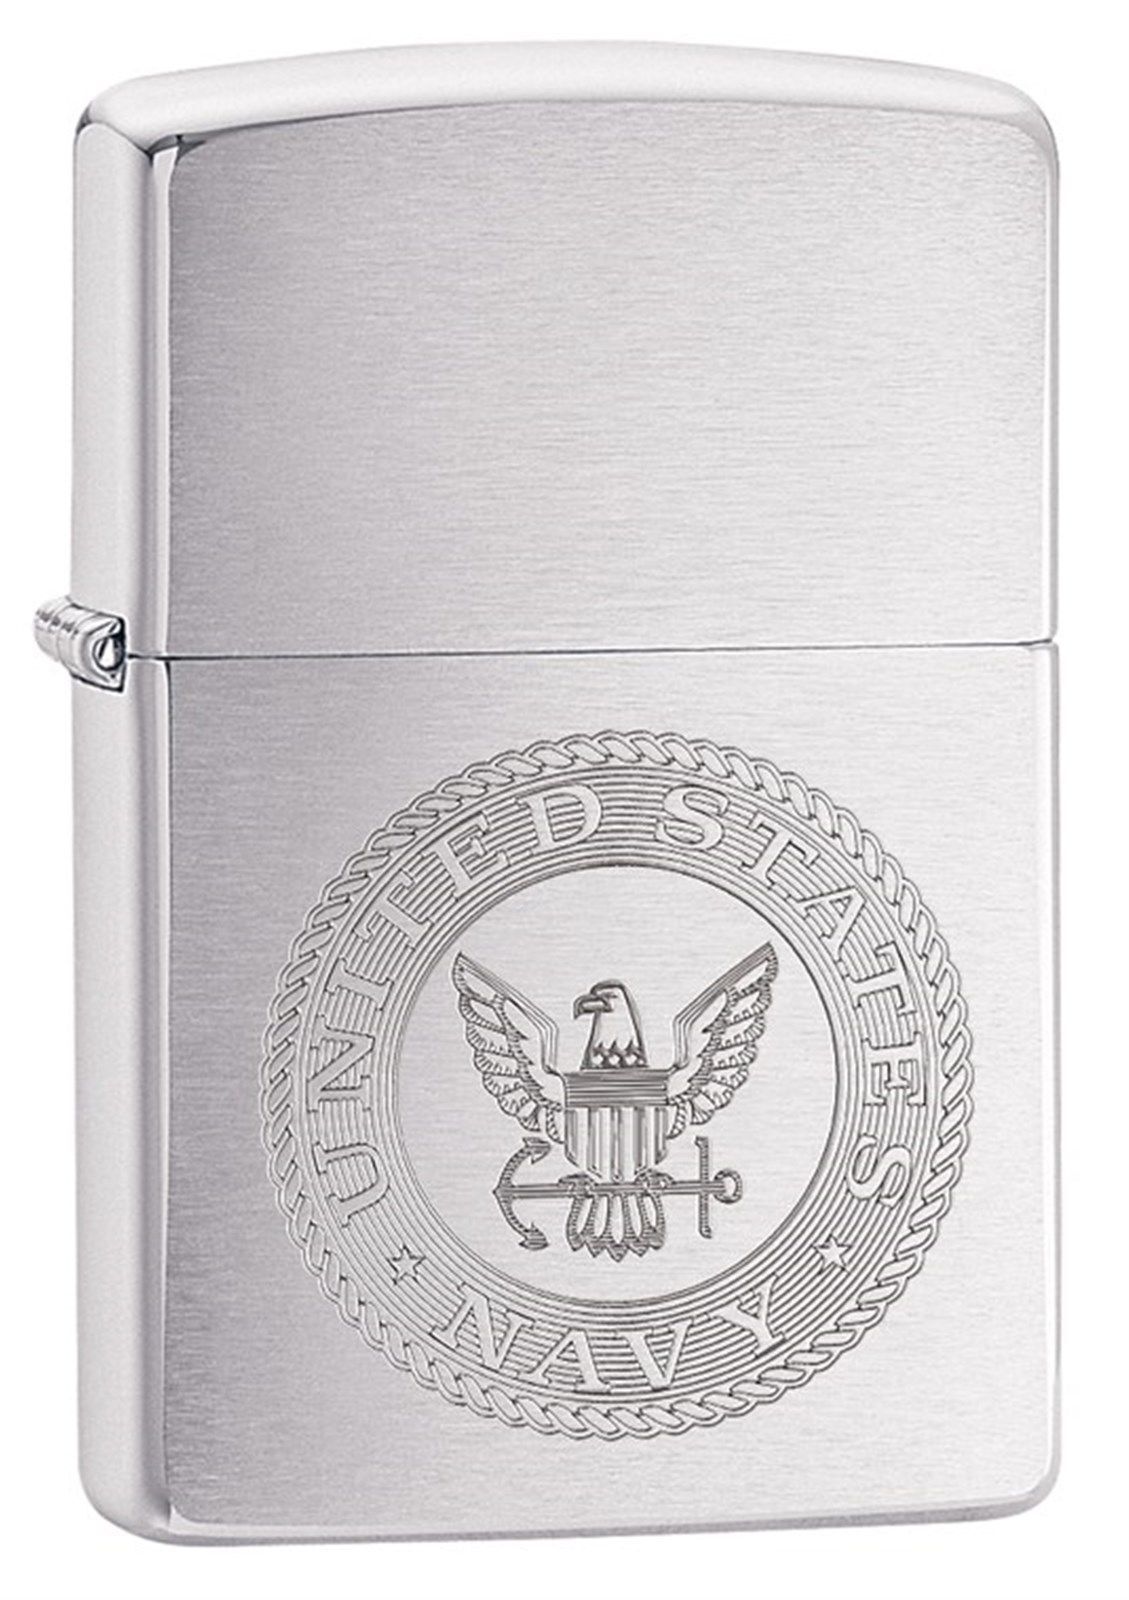 Zippo Windproof Lighter With Engraved United States Navy Seal, 29385, New In Box